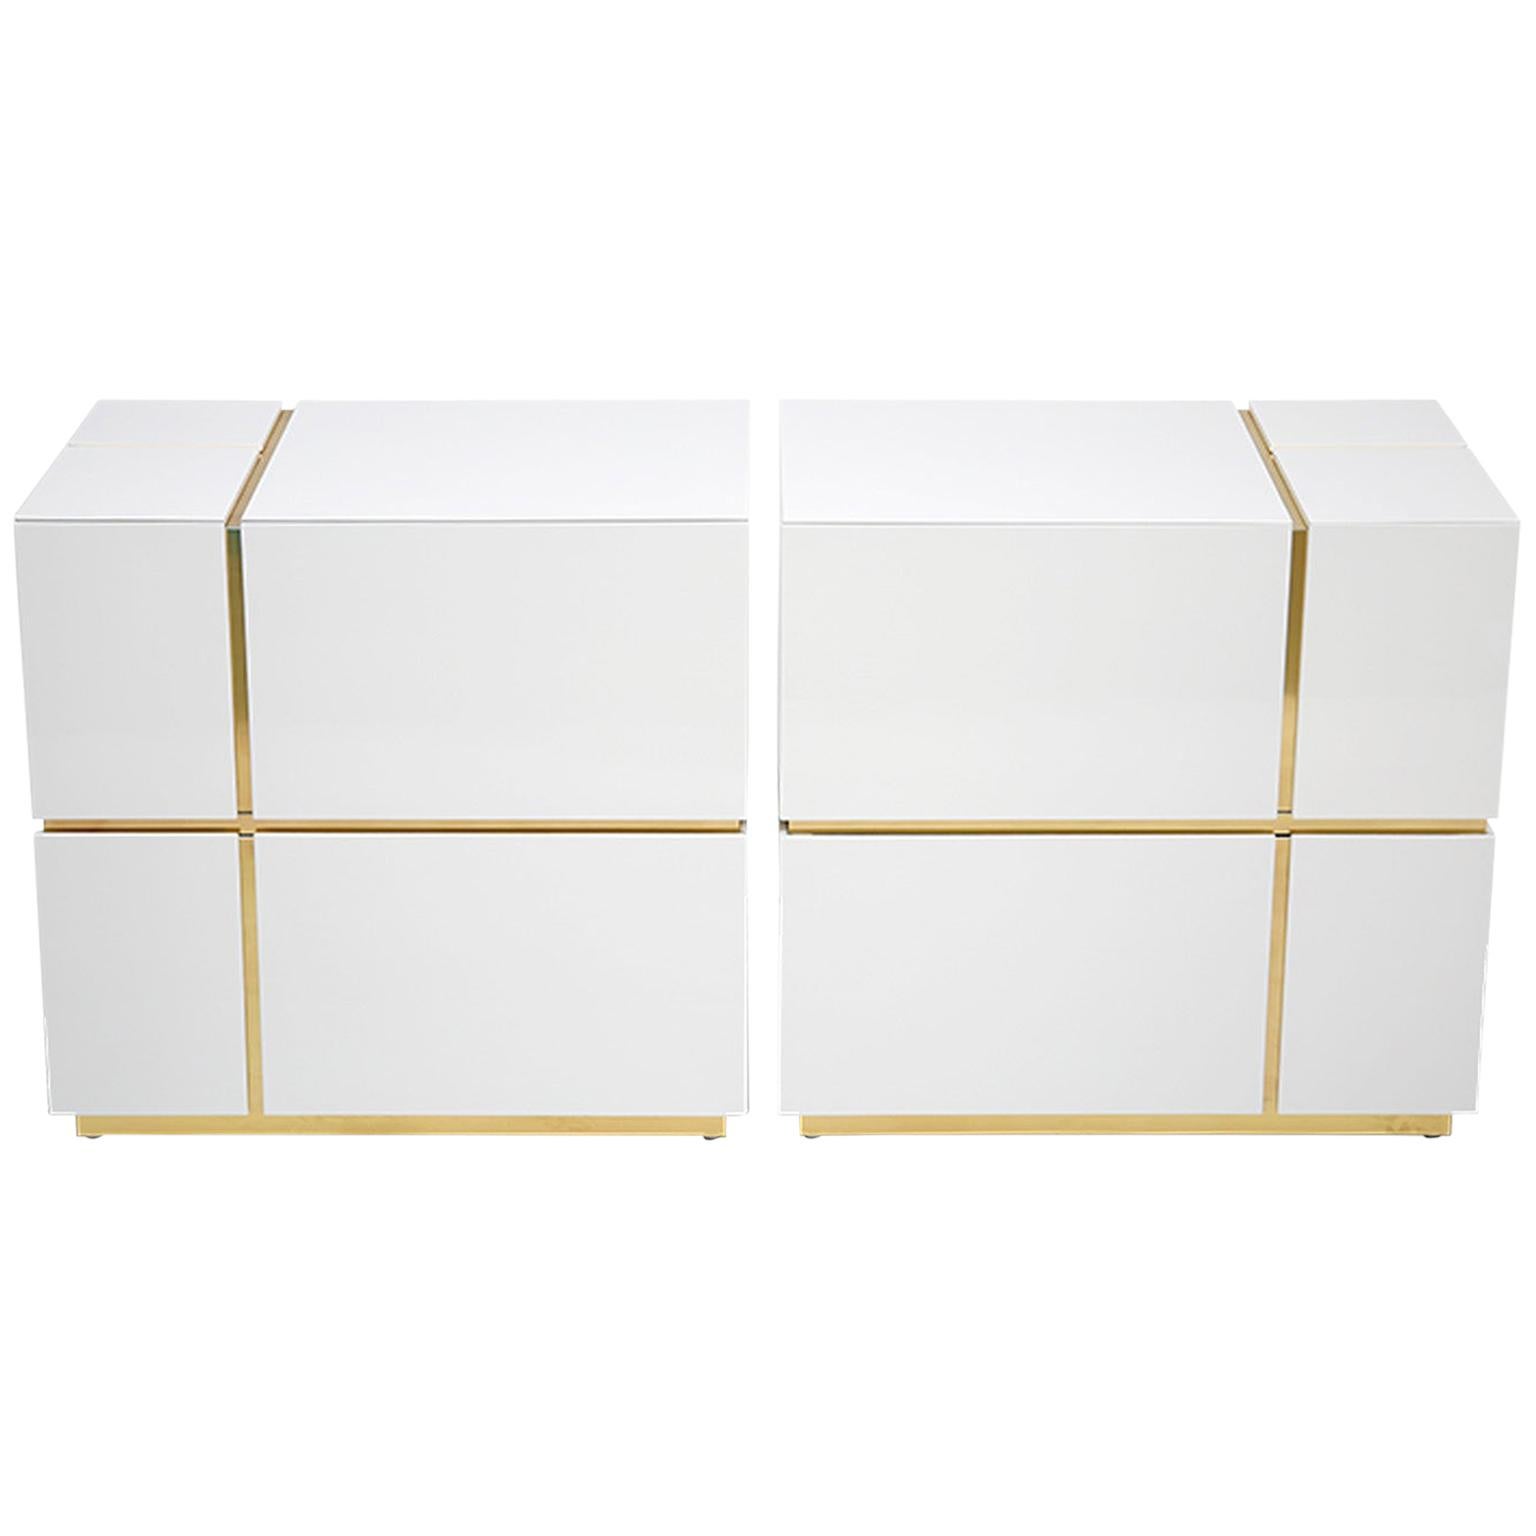 Set of Two Cube White High Gloss Nightstand with Large Drawers